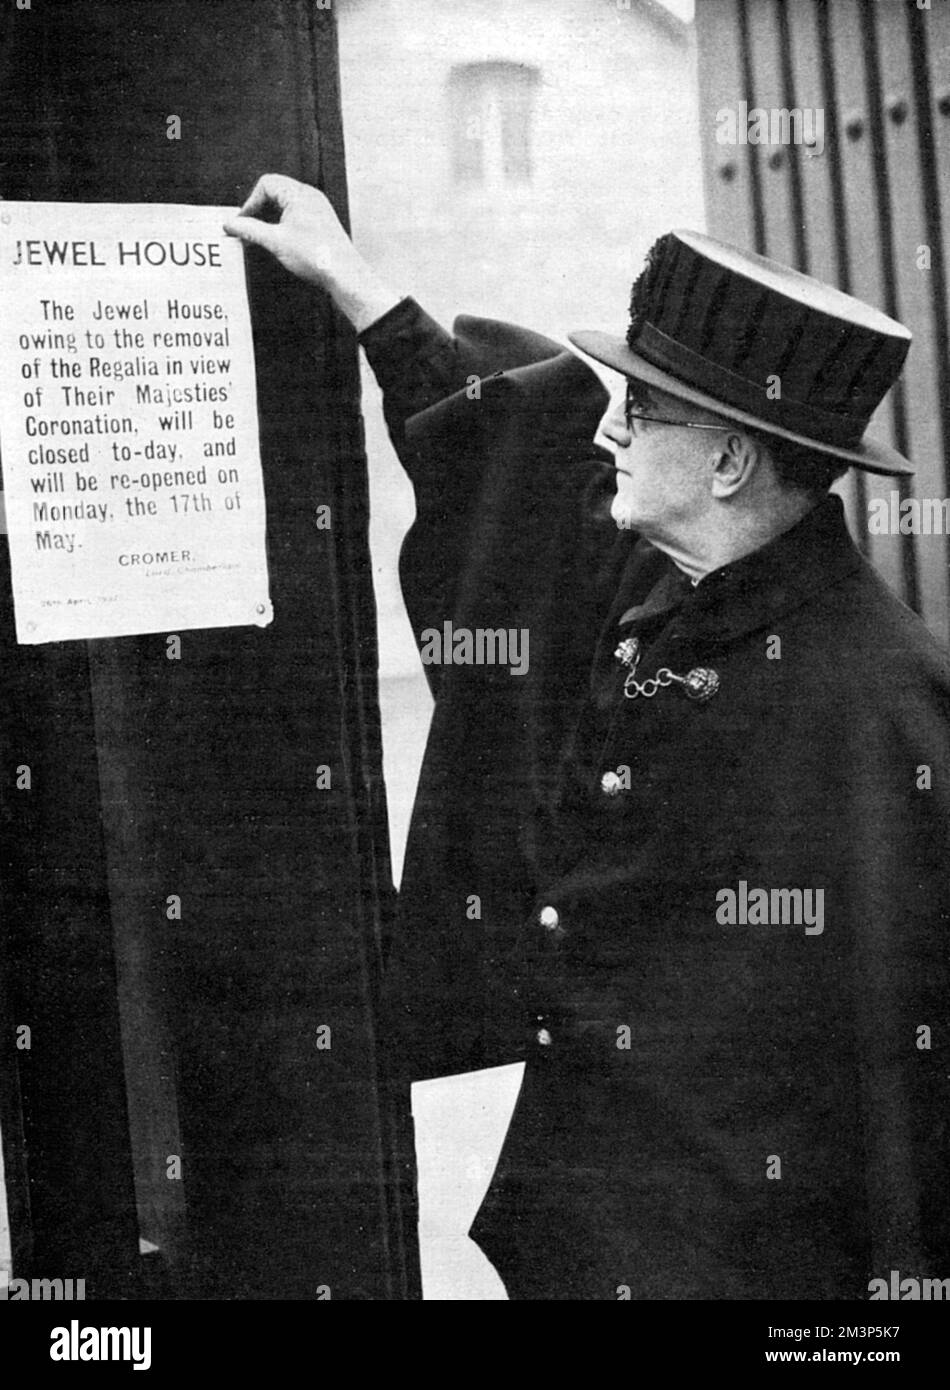 A Yeoman warder pinning up the Lord Chamberlain's notice on the Wakefield Tower in the Tower of London, announcing that owing to the removal of the Regalia the place will be closed until May 17.  Before the Coronation, the jewels were held at the court jewellers, Garrard, where they were being furbished.     Date: 1937 Stock Photo